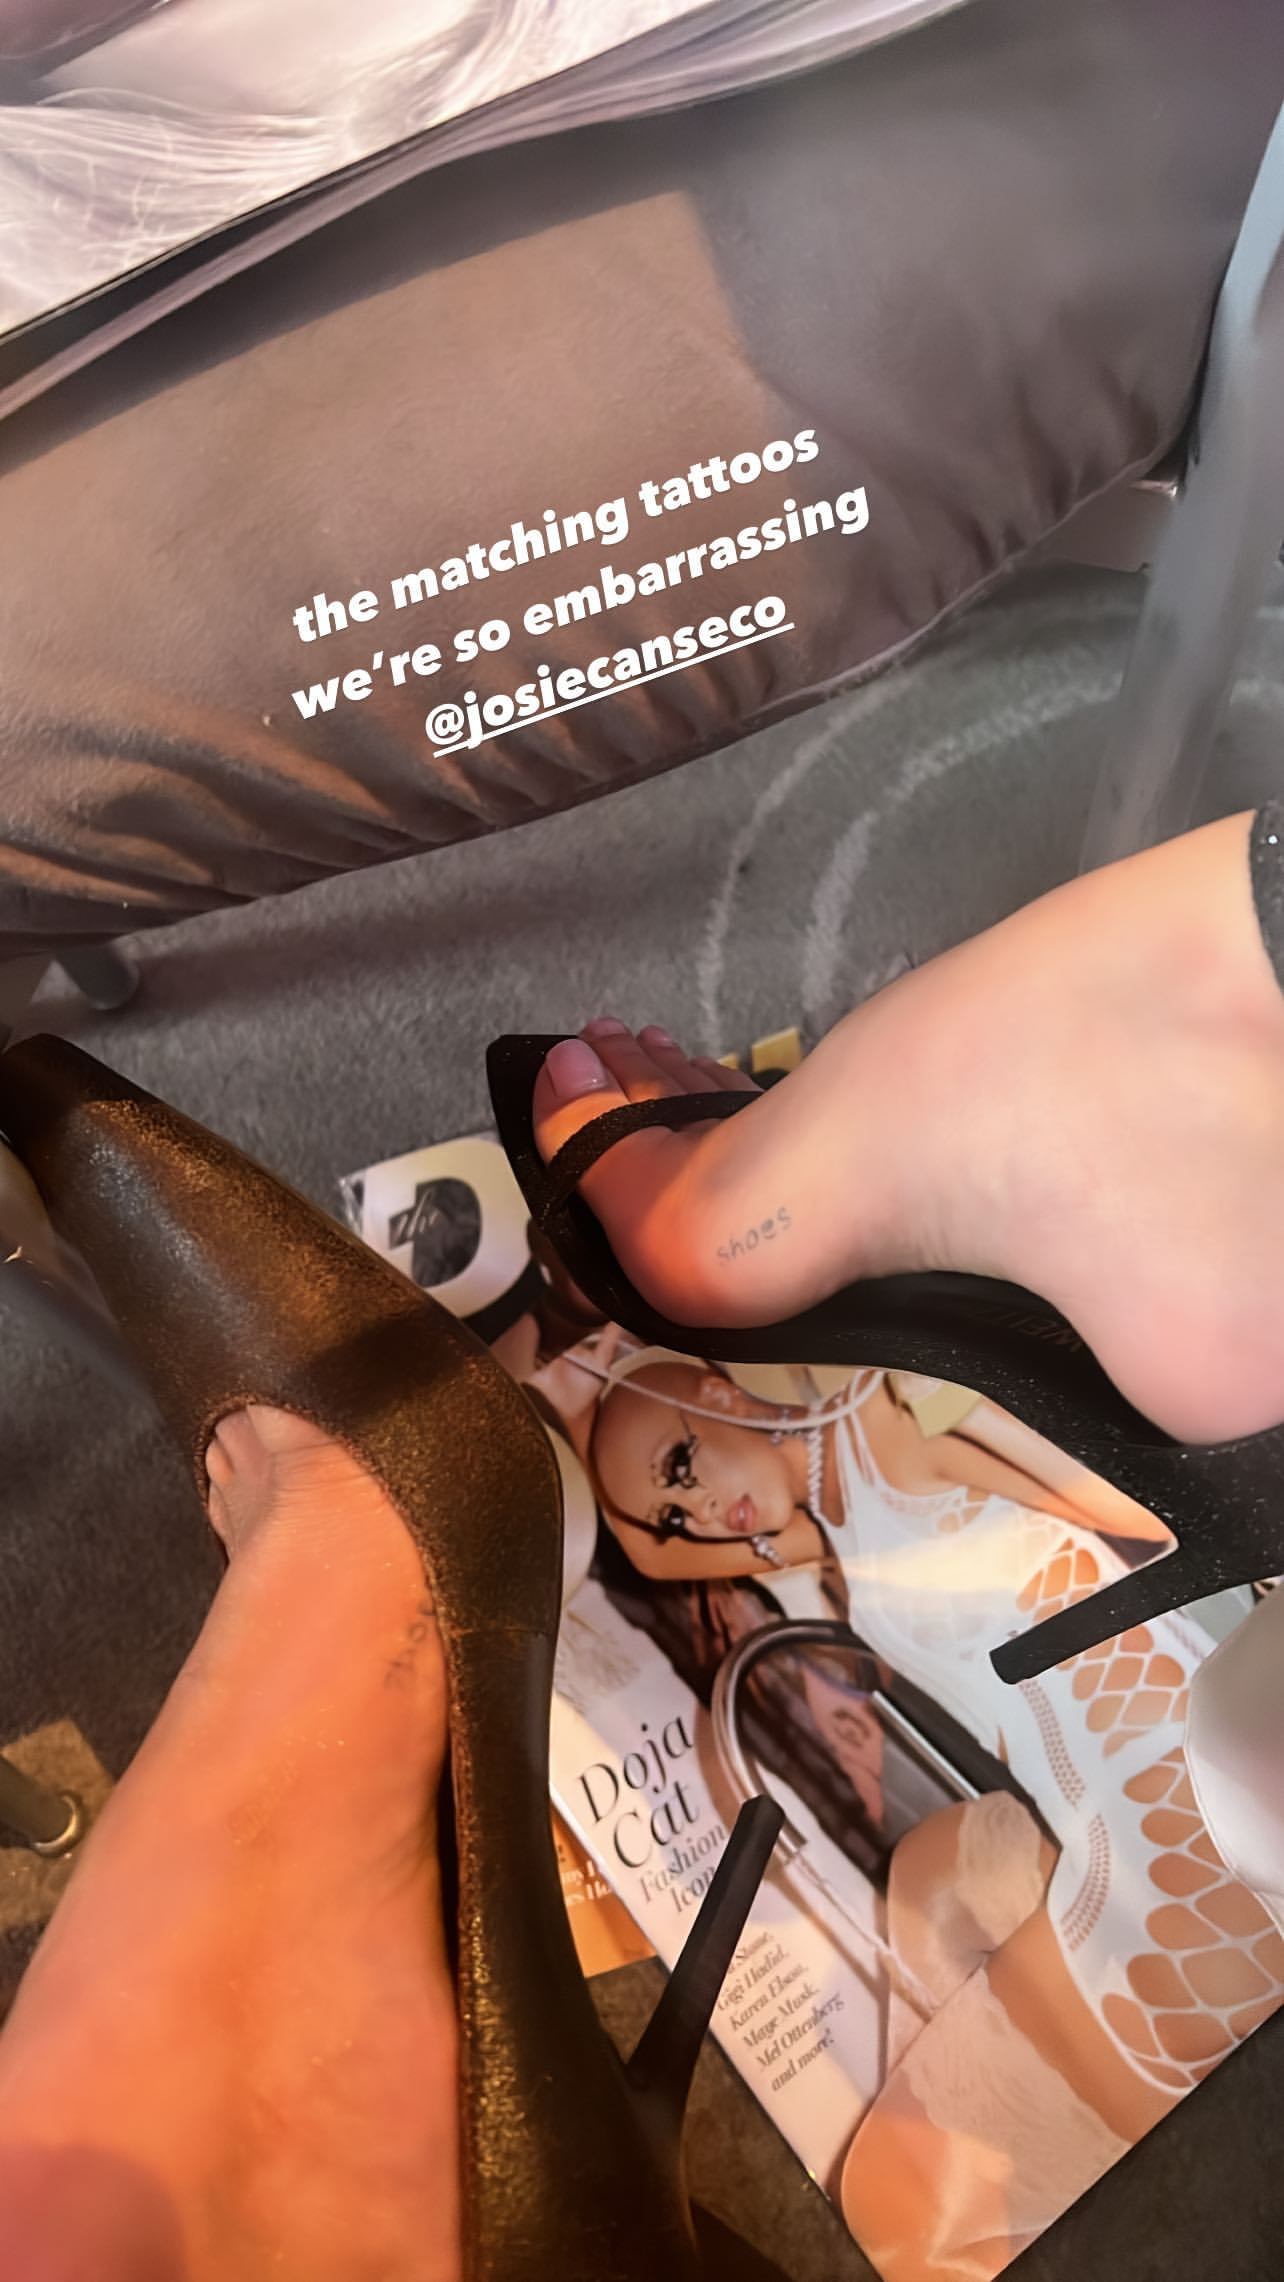 Josie canseco feet